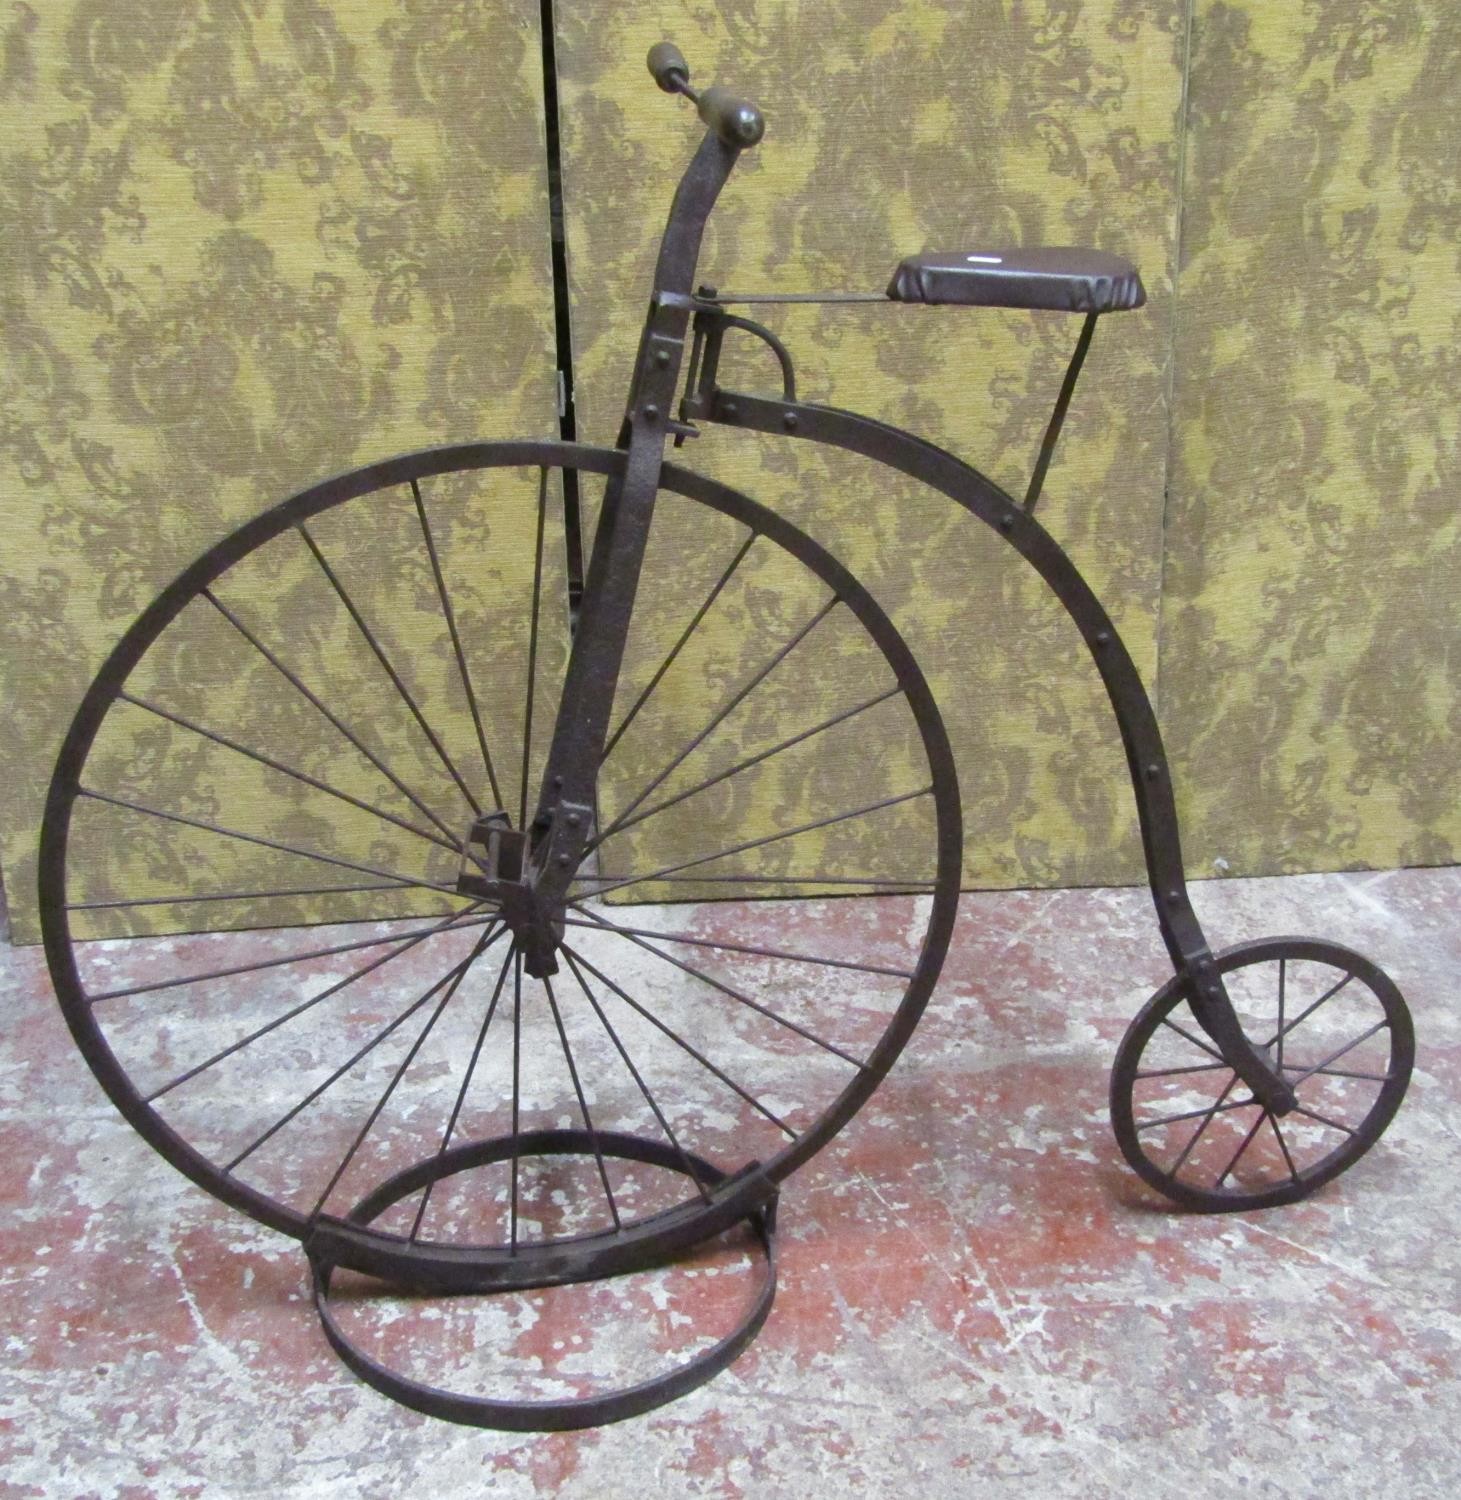 A decorative model penny farthing bicycle, 105cm high - Image 6 of 6